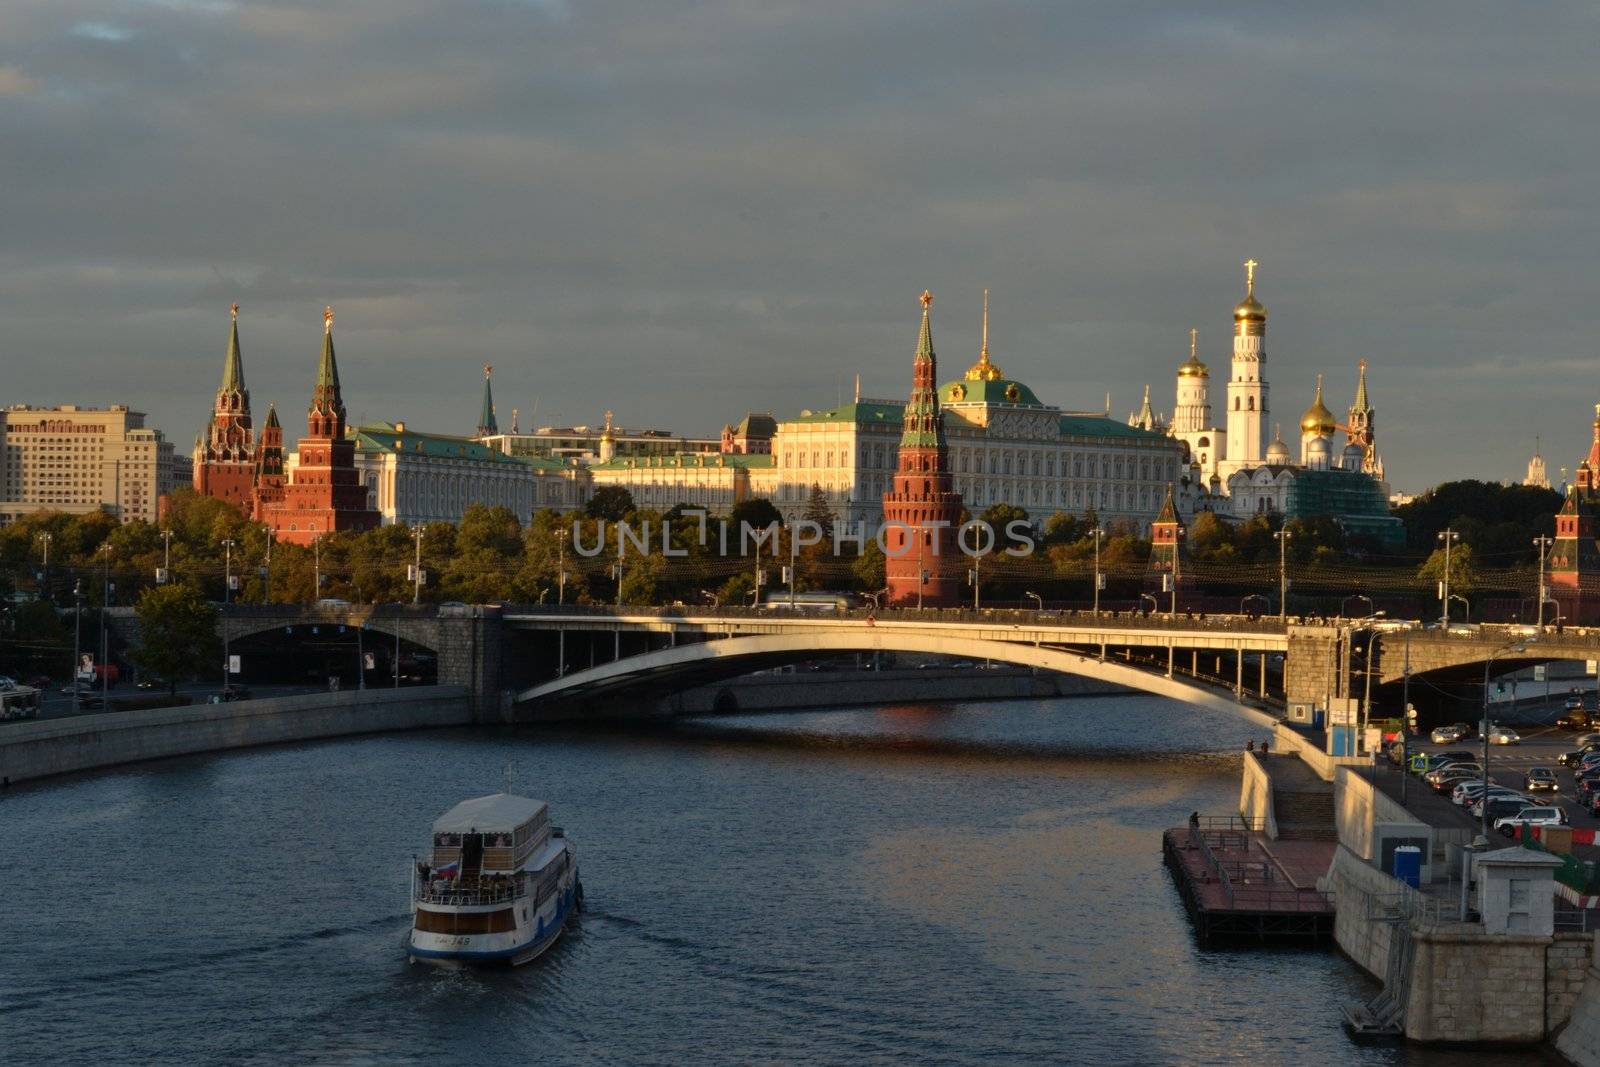 View of The Kremlin and The Moskva river